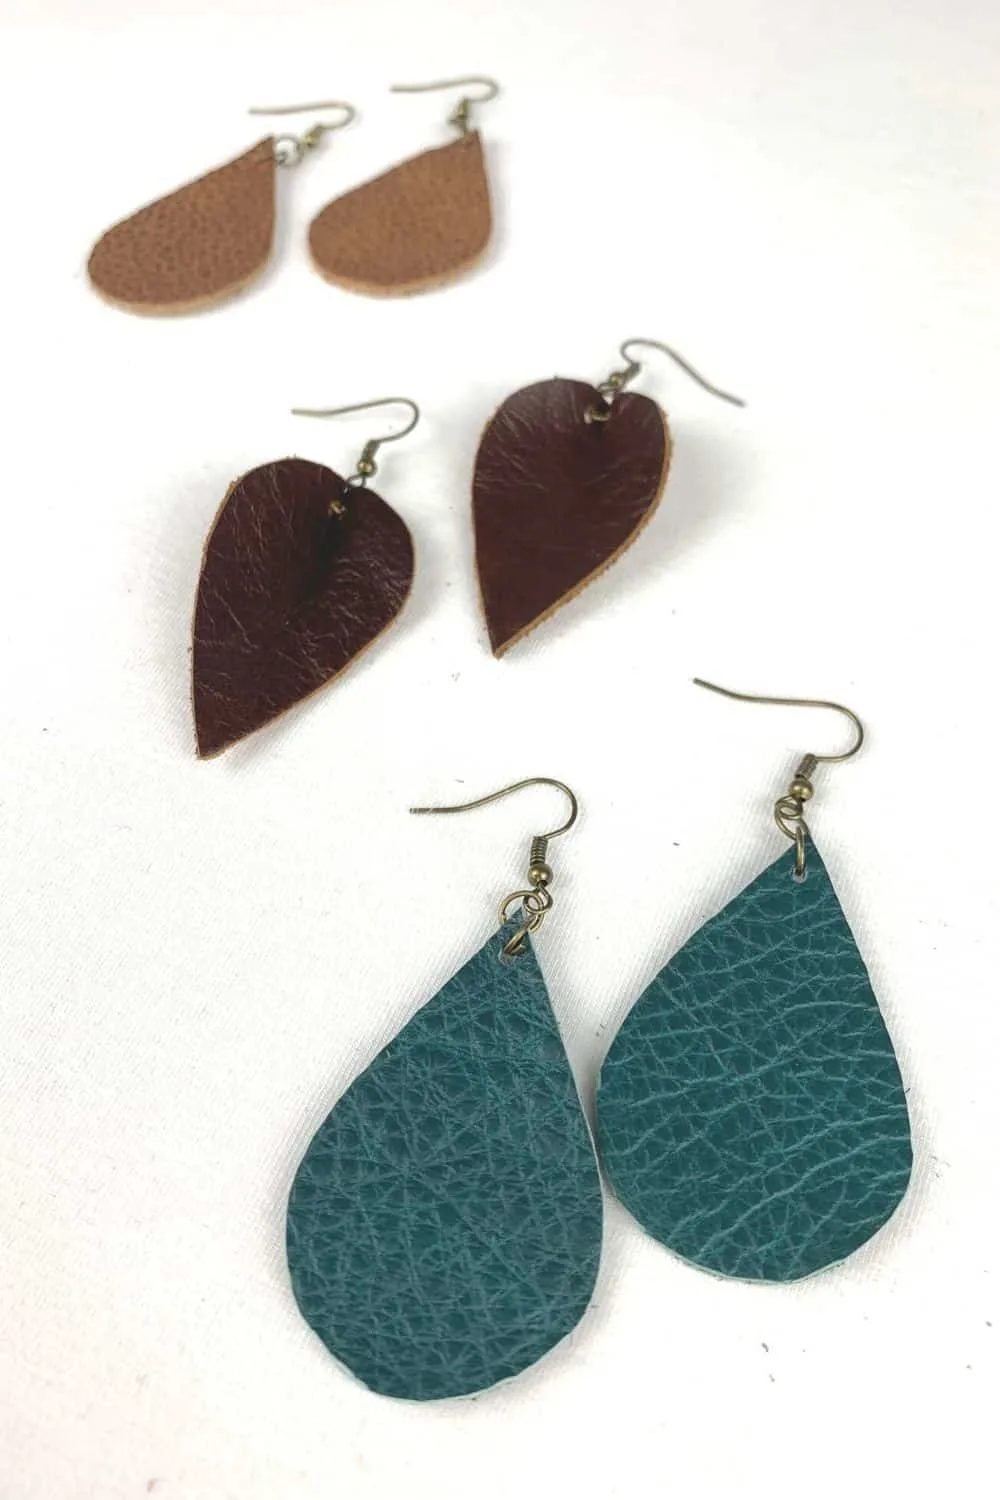 How To Make Leather Earrings : The Ultimate DIY Leather Earrings